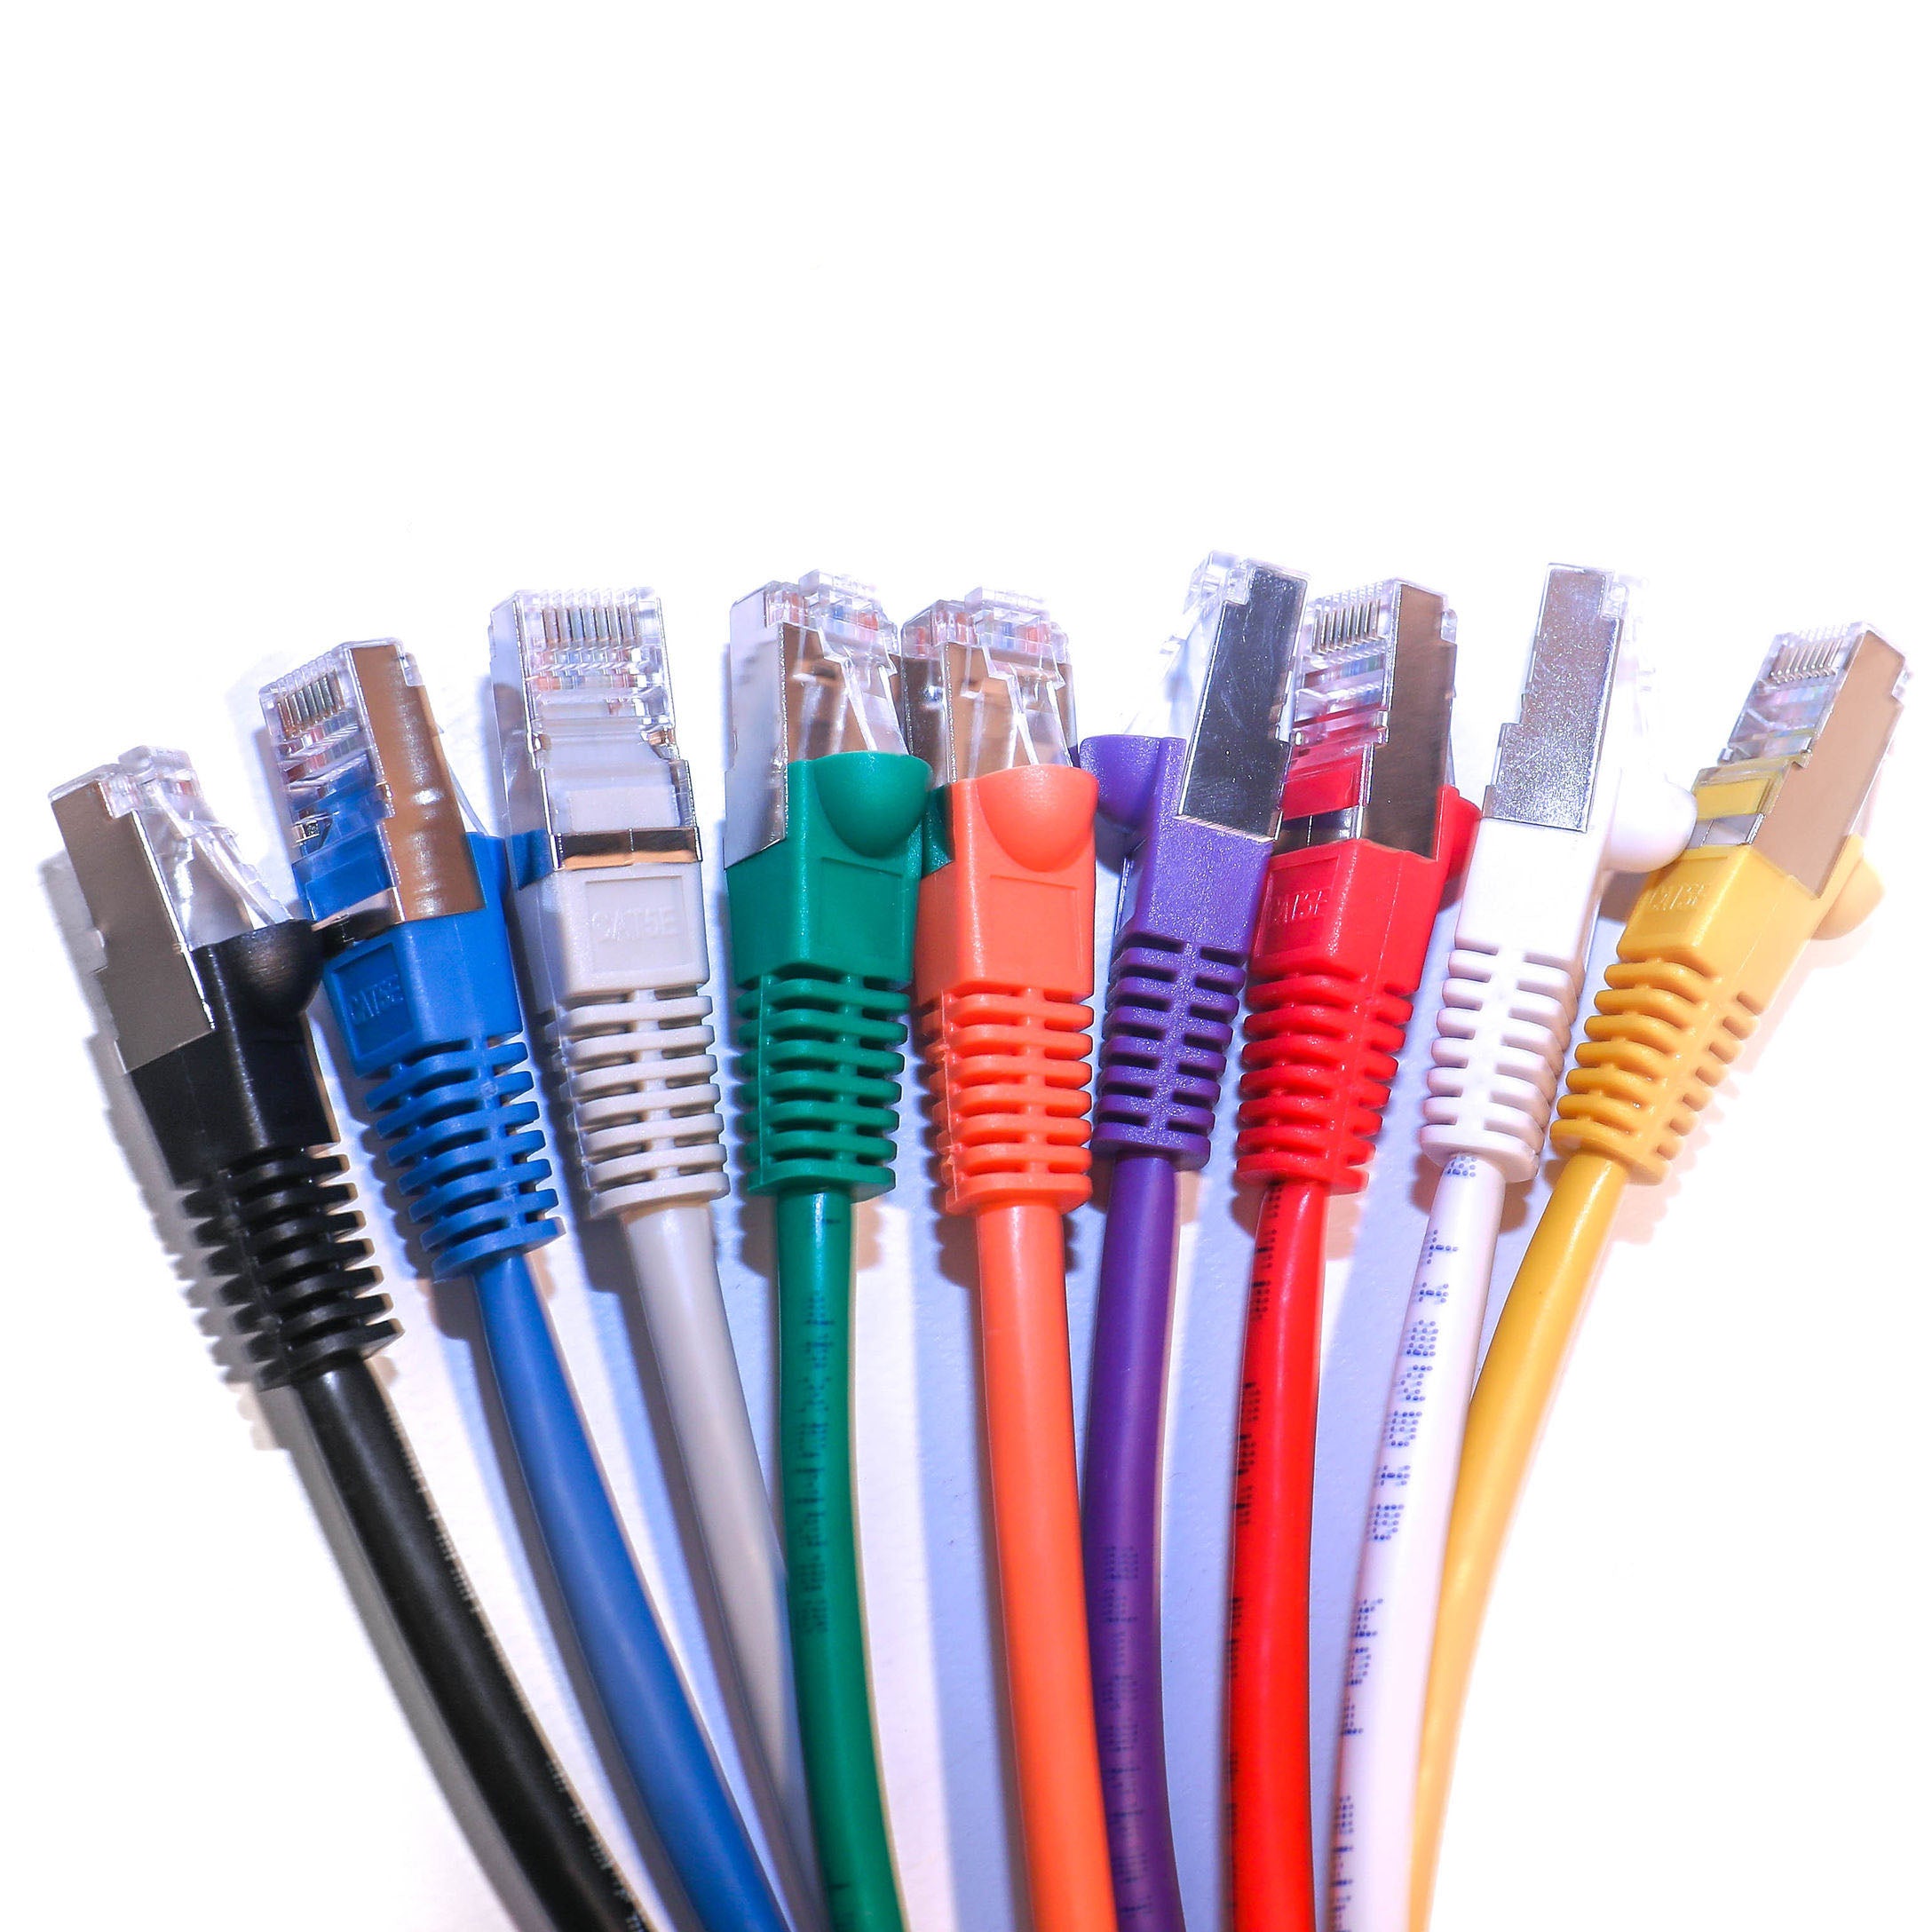 What Are the Differences Between Cat5 and Cat5e Cables?